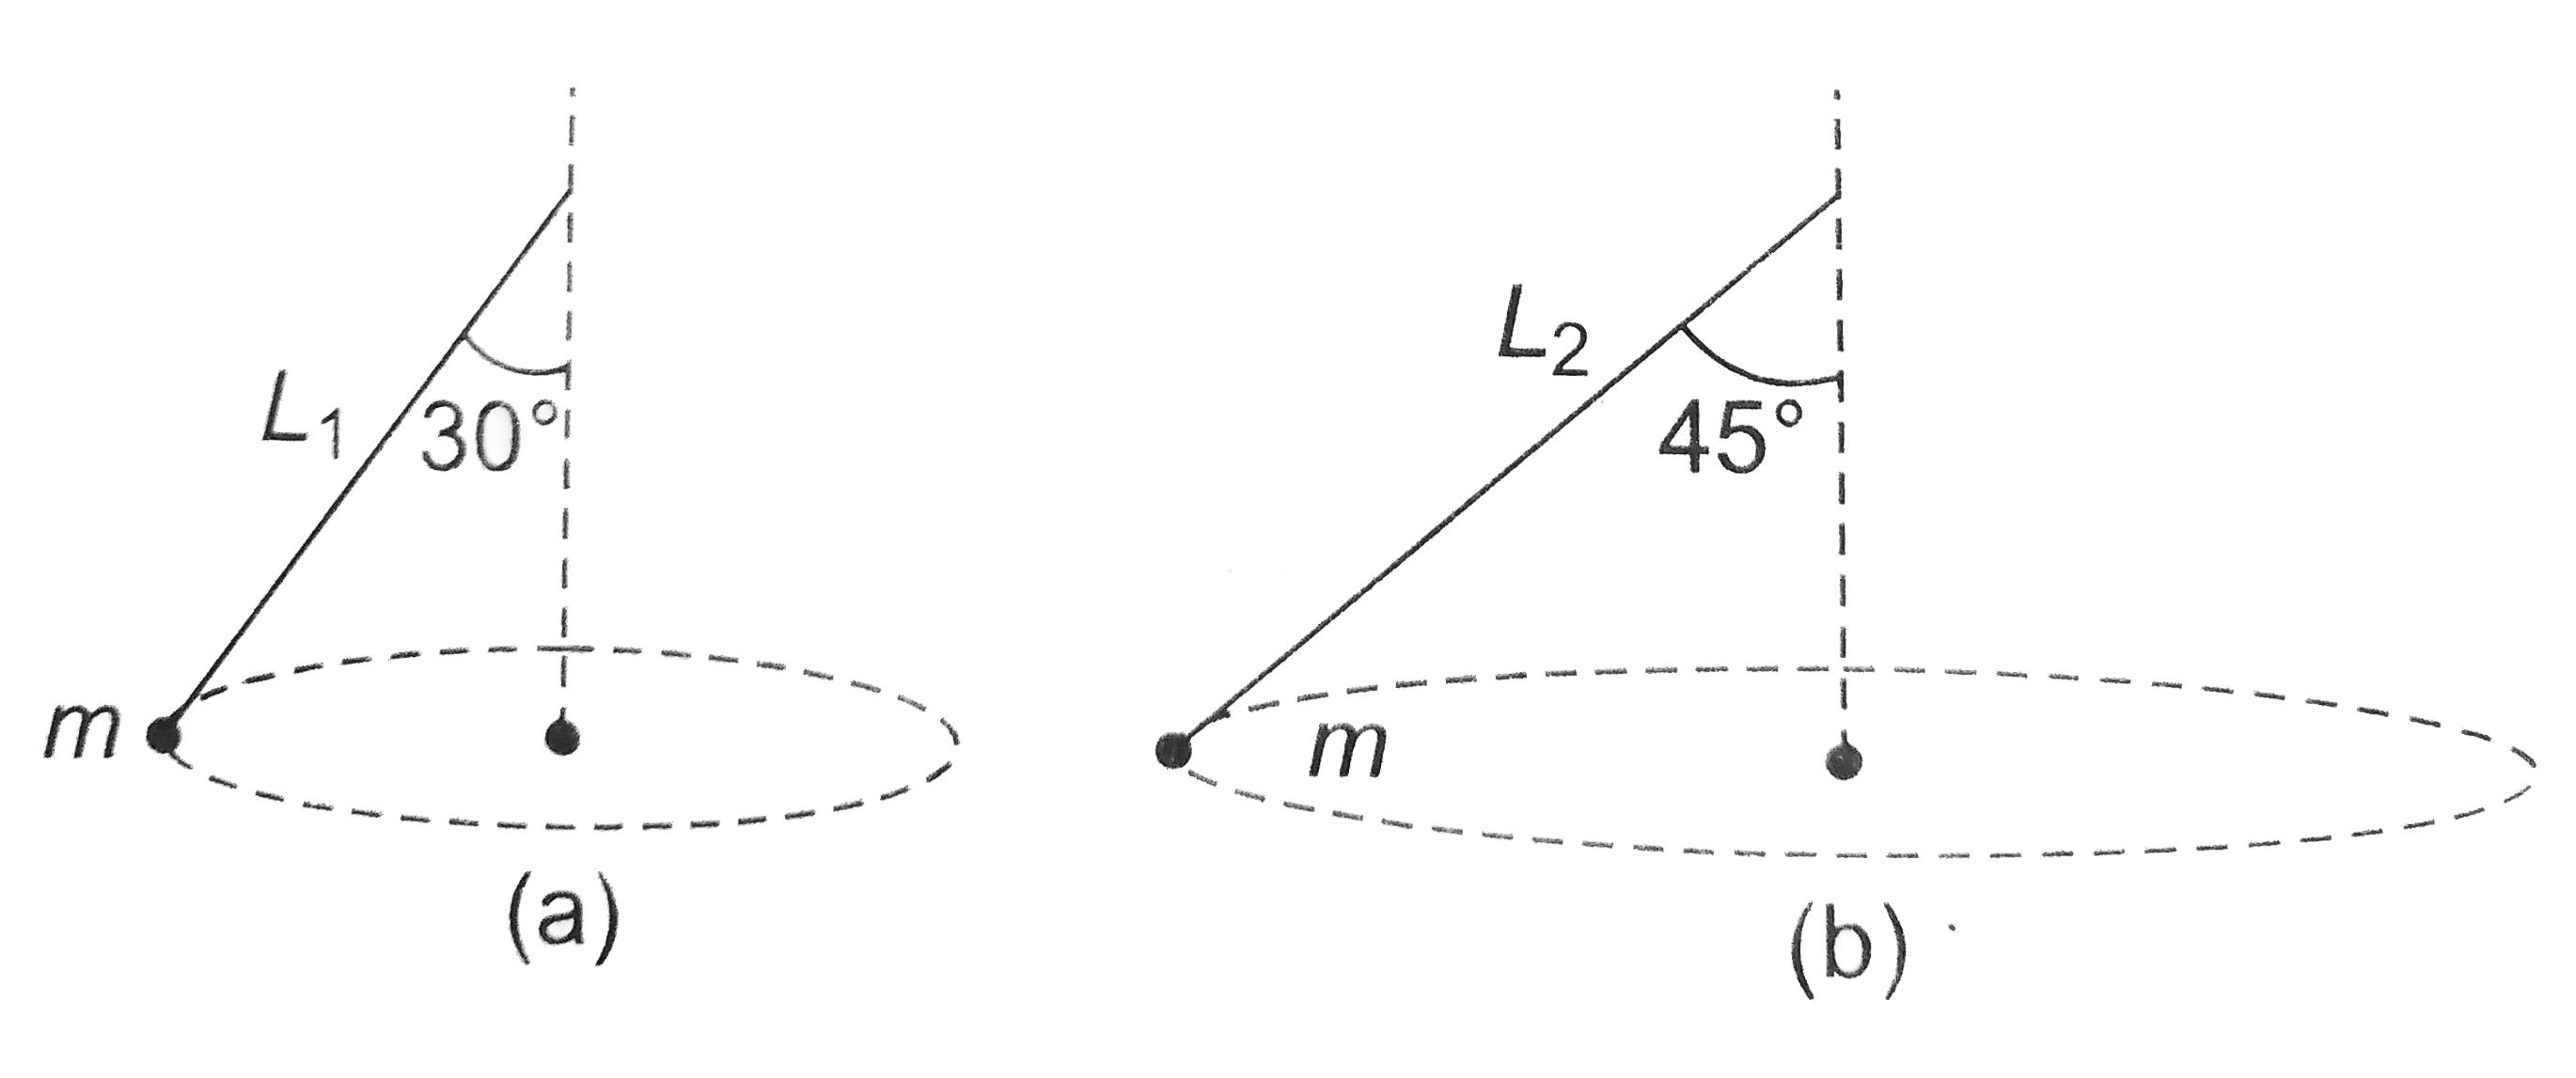 Two partical tied to different strings are whirled in a horizontal circle as shown in figure. The ratio of lengths of the string so that they complete their circular path with equal time priod is: